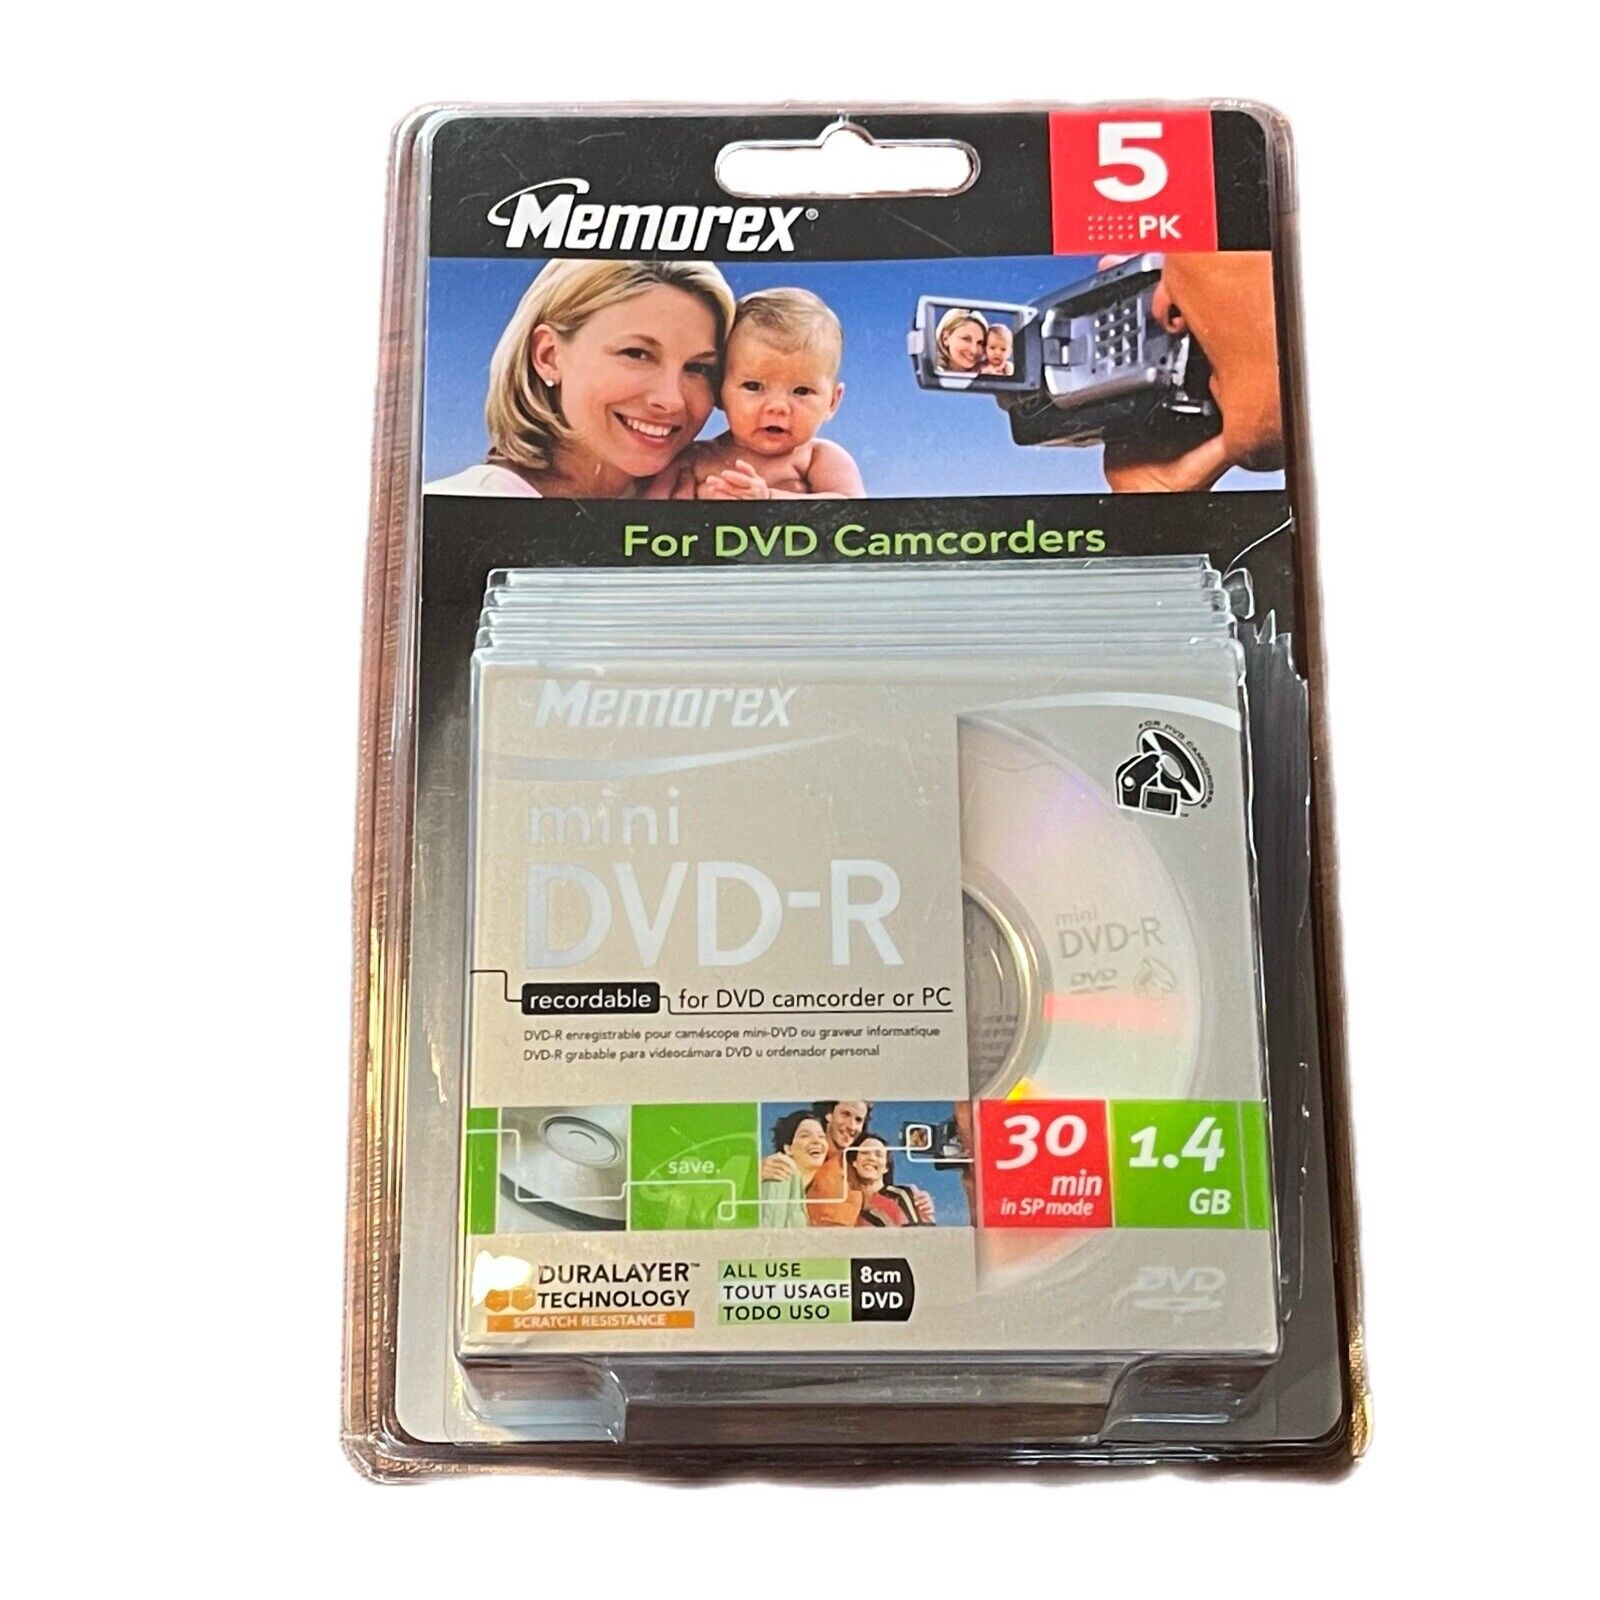 5 Pack Memorex Mini DVD-R 1.4GB 30 Minutes Recordable for Camcorder or PC